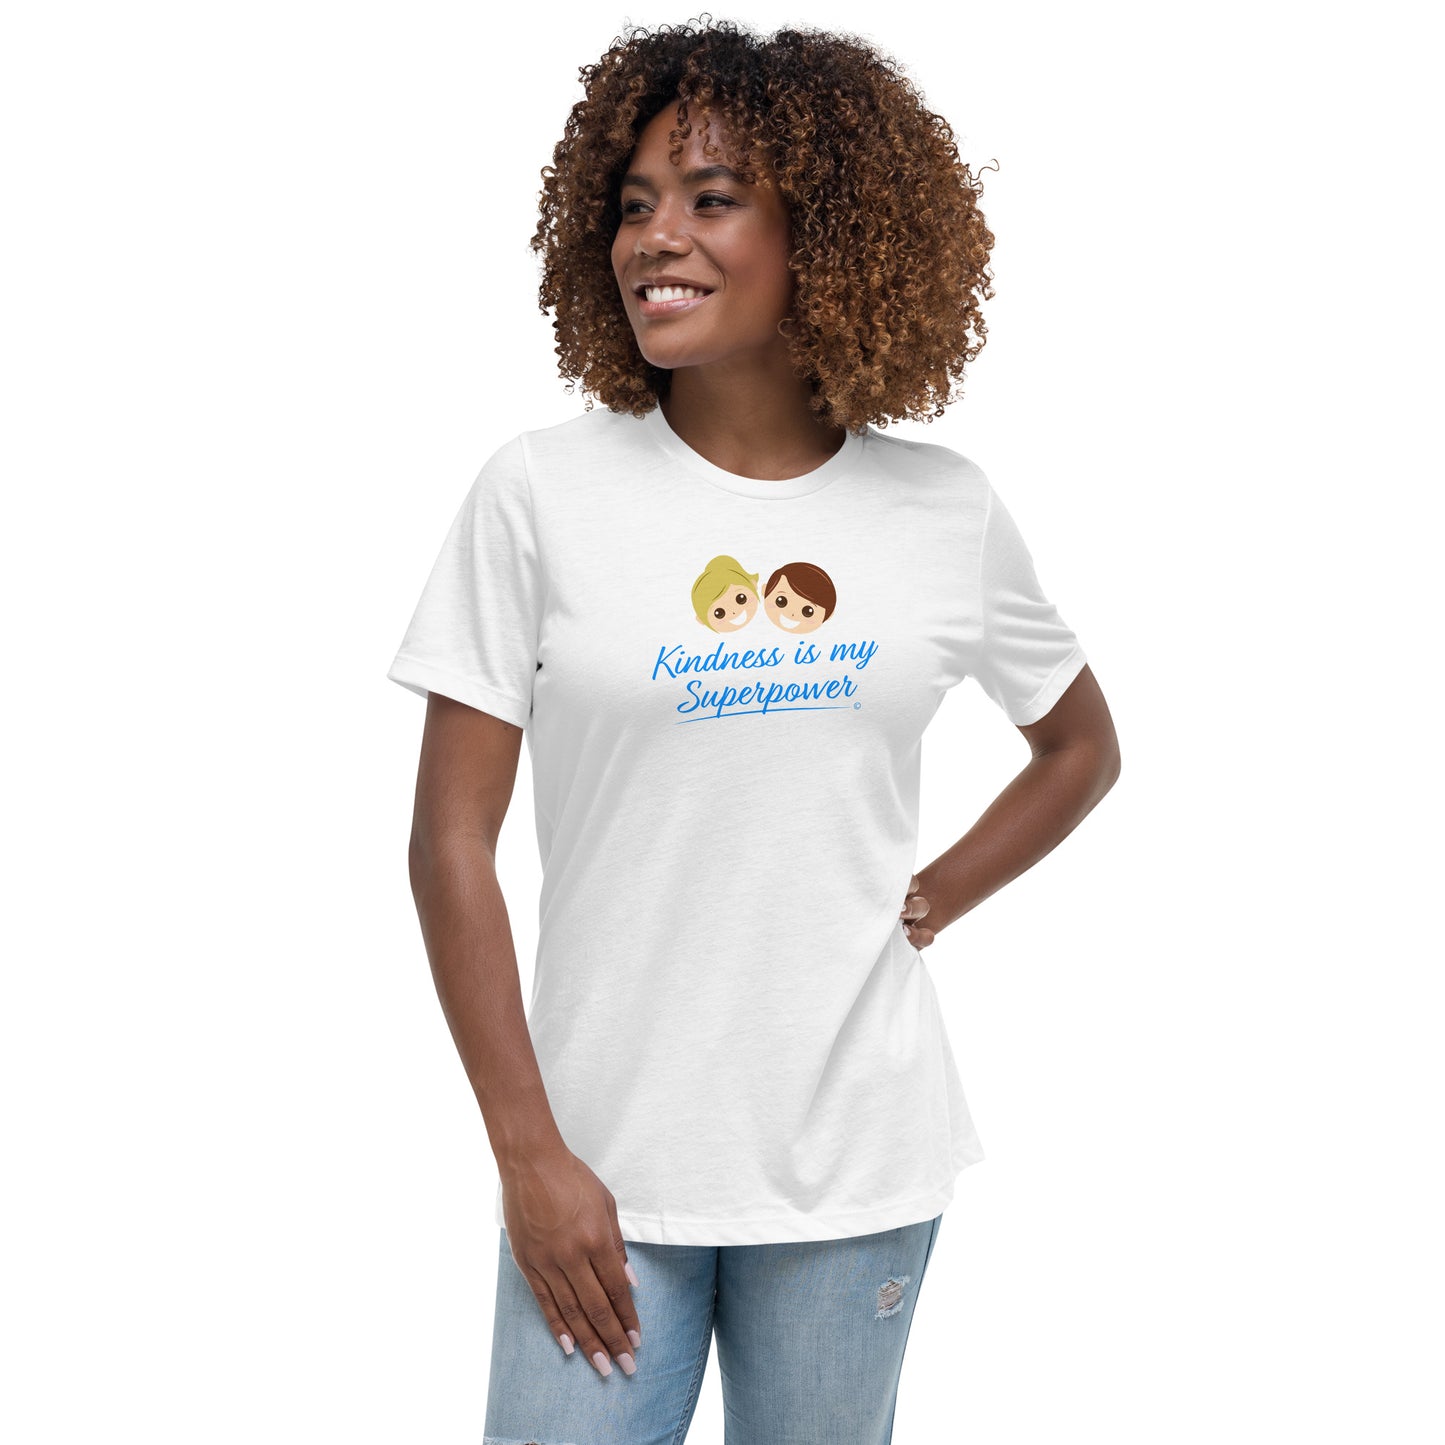 A smiling young woman wearing a white shirt with the empowering quote 'Kindness is my Superpower' in bold lettering.